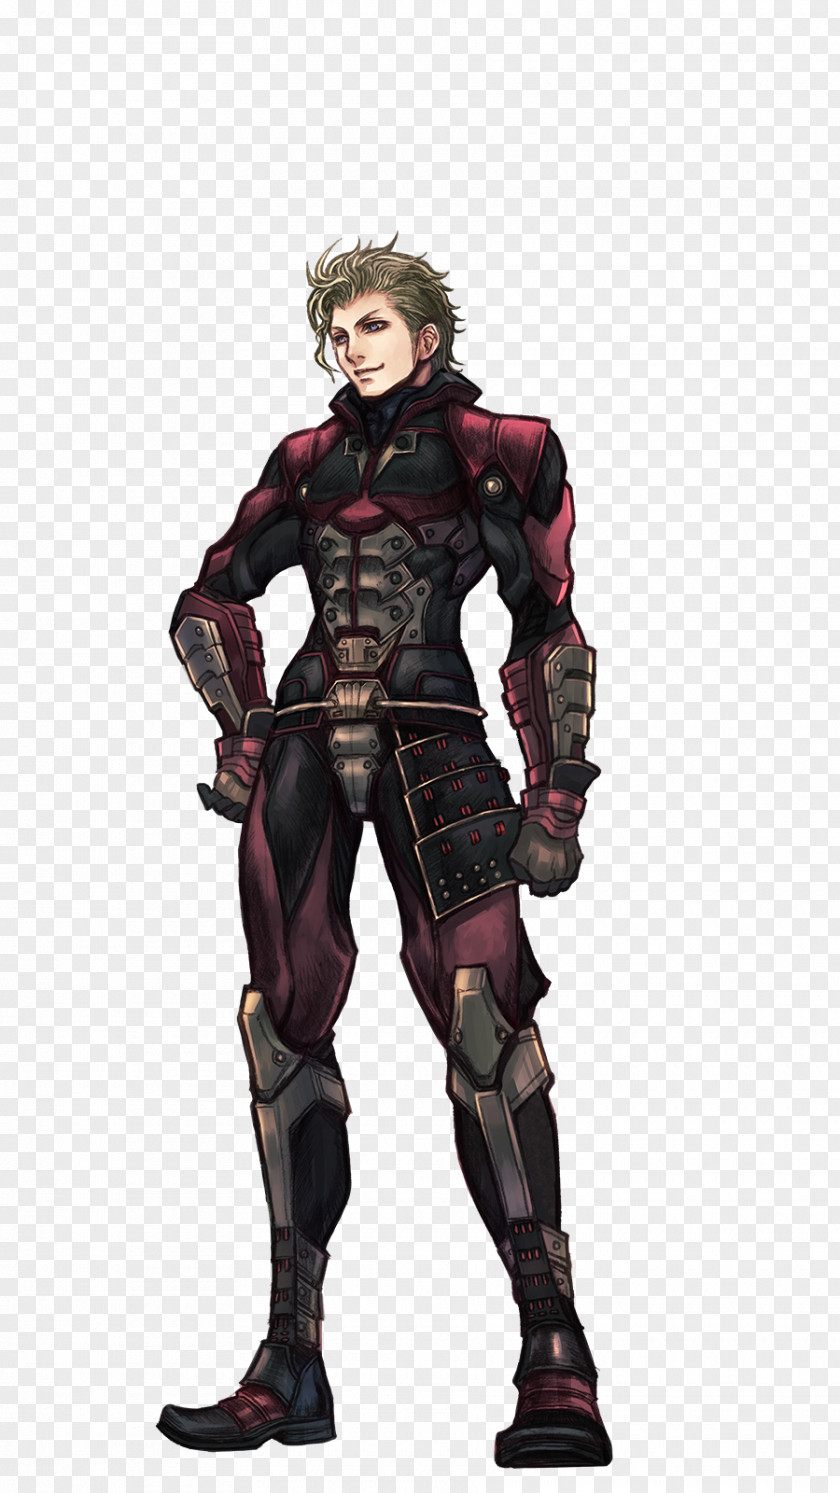 Xenoblade Chronicles 2 Wii U Video Game PNG